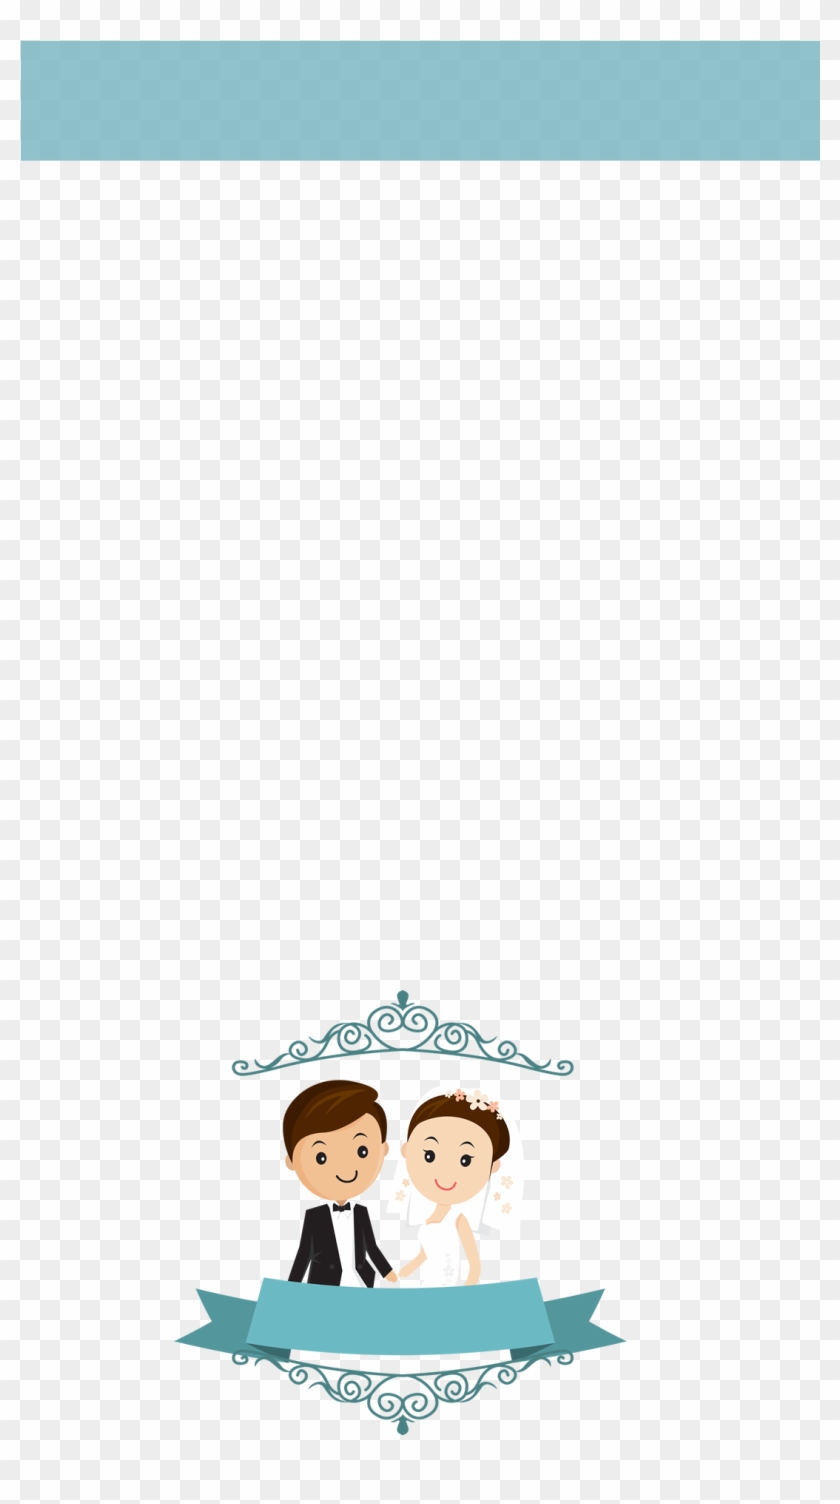 Holding Hands - Wedding Couple Cartoon Png Clipart